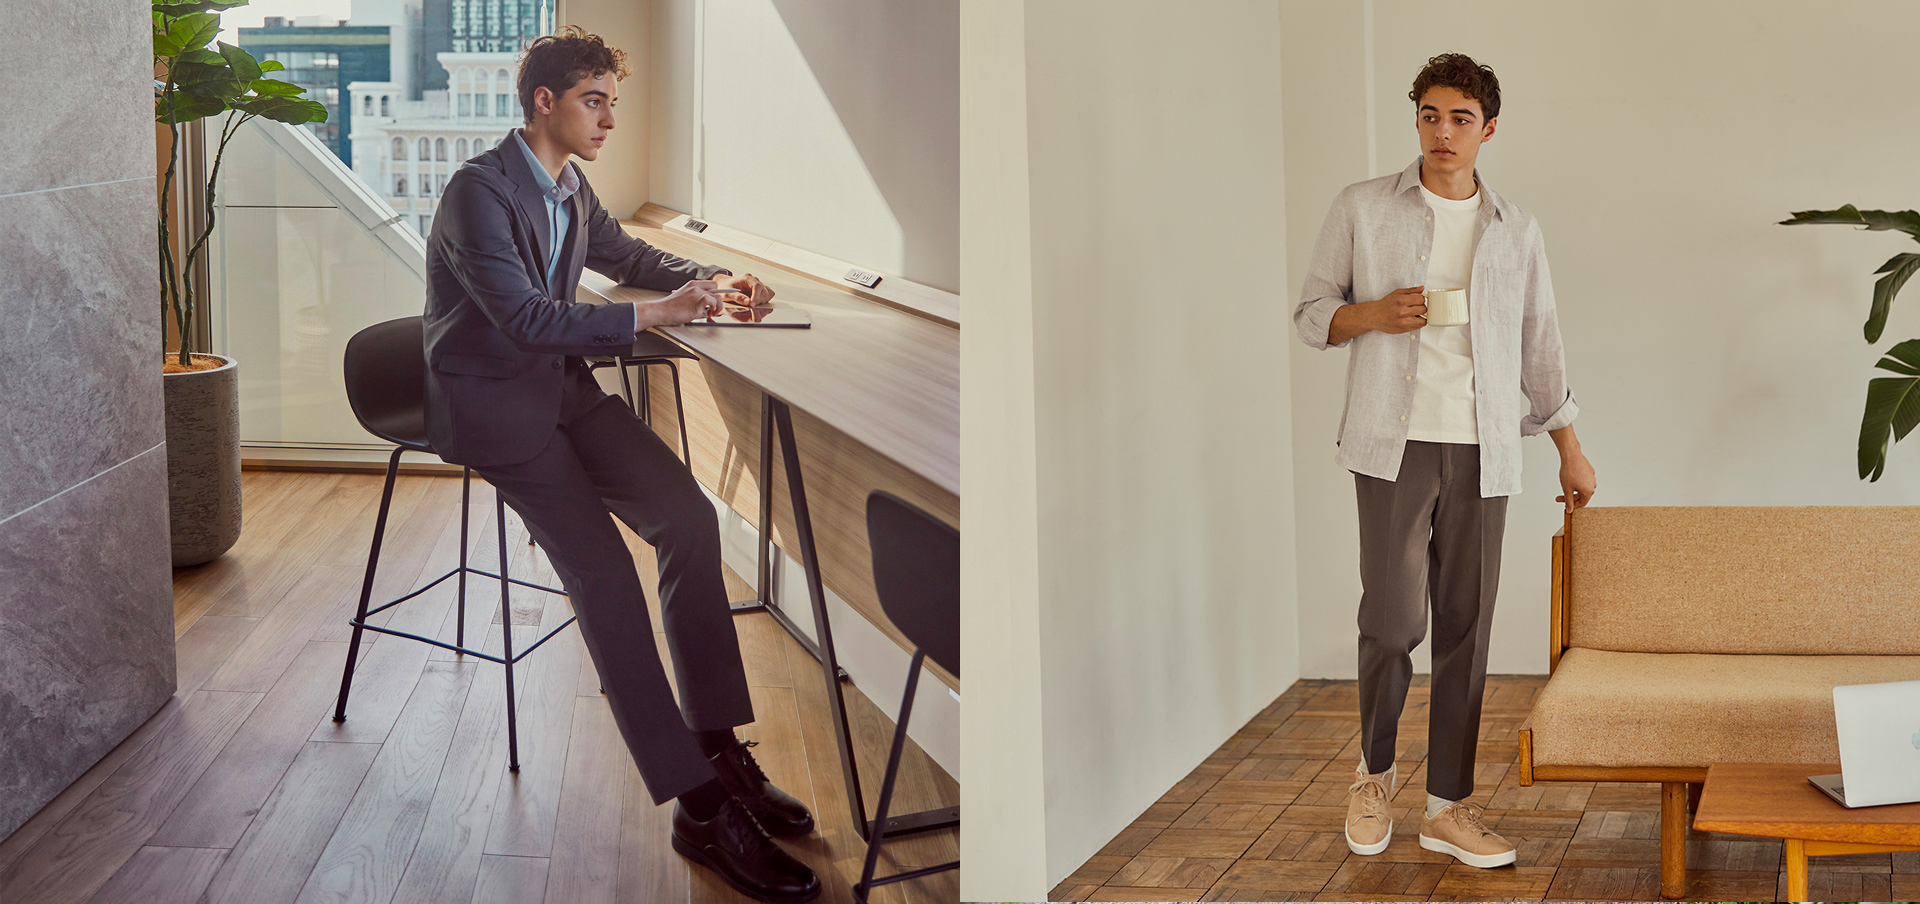 WORK IN COMFORT WITH UNIQLO